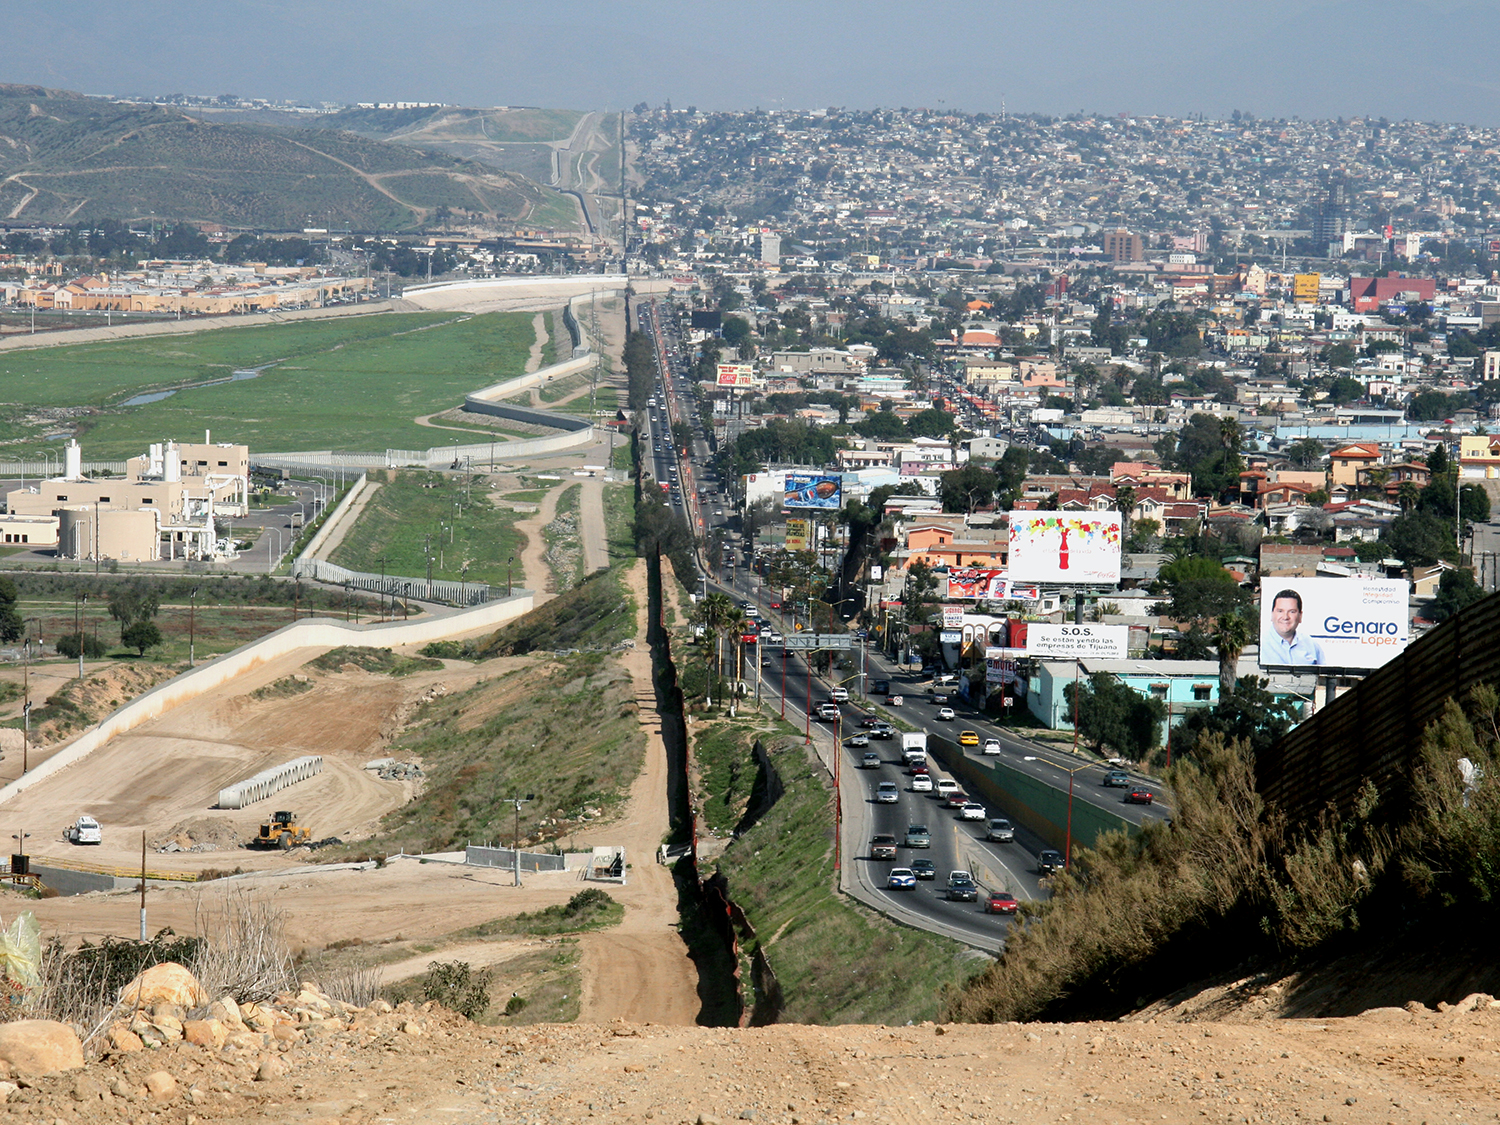 on-the-right-is-tijuana-on-the-left-is-san-diego